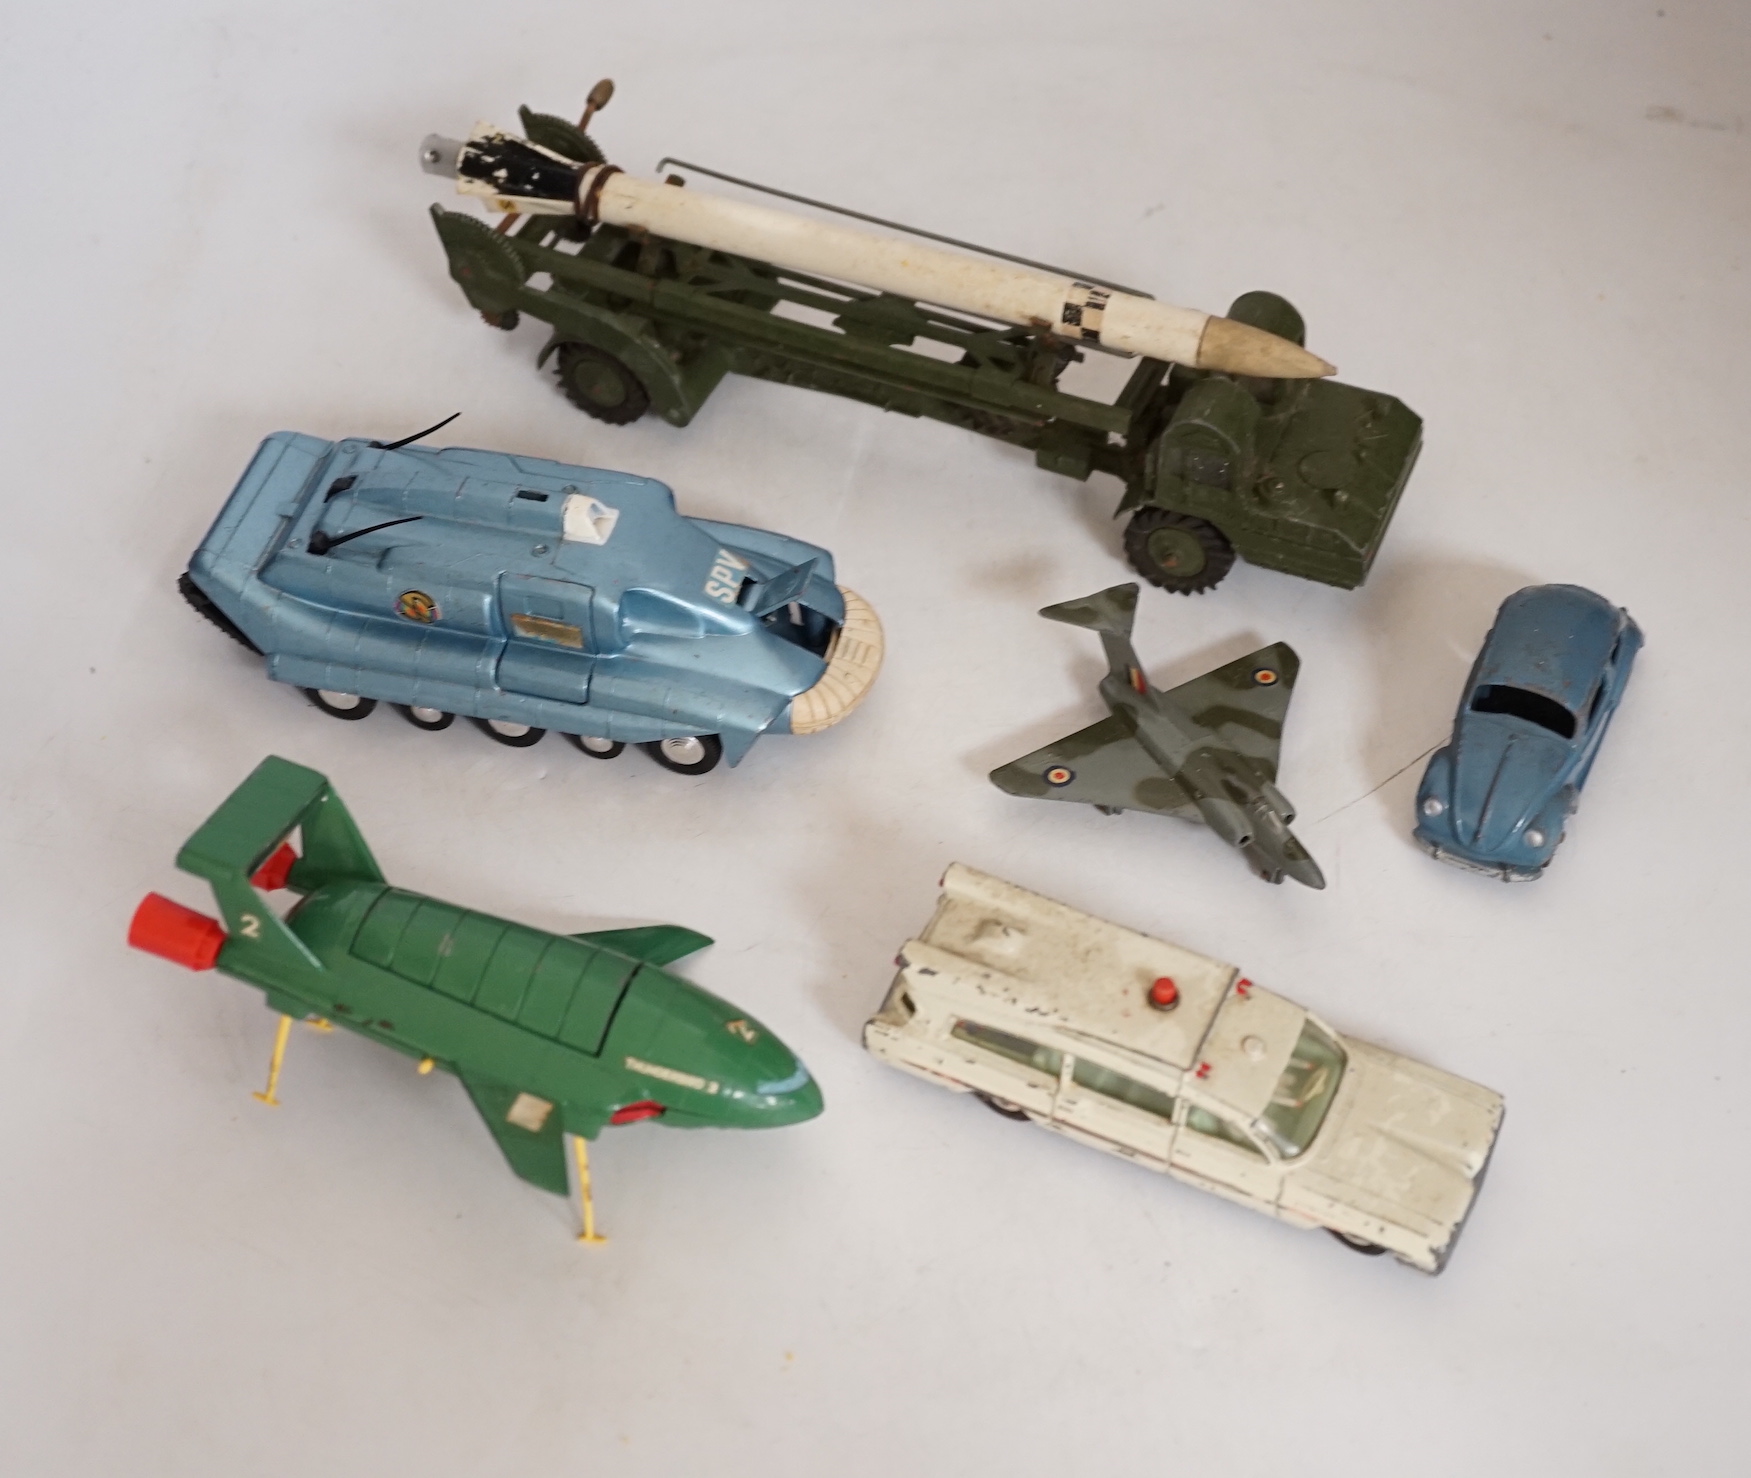 Twenty-two Dinky Toys mostly for restoration, including a Car Carrier (984), Missile Erector, Missile Servicing Platform, Spectrum Pursuit Vehicle, Thunderbird 2 containing Thunderbird 4, Rolls-Royce Silver Wraith, etc.